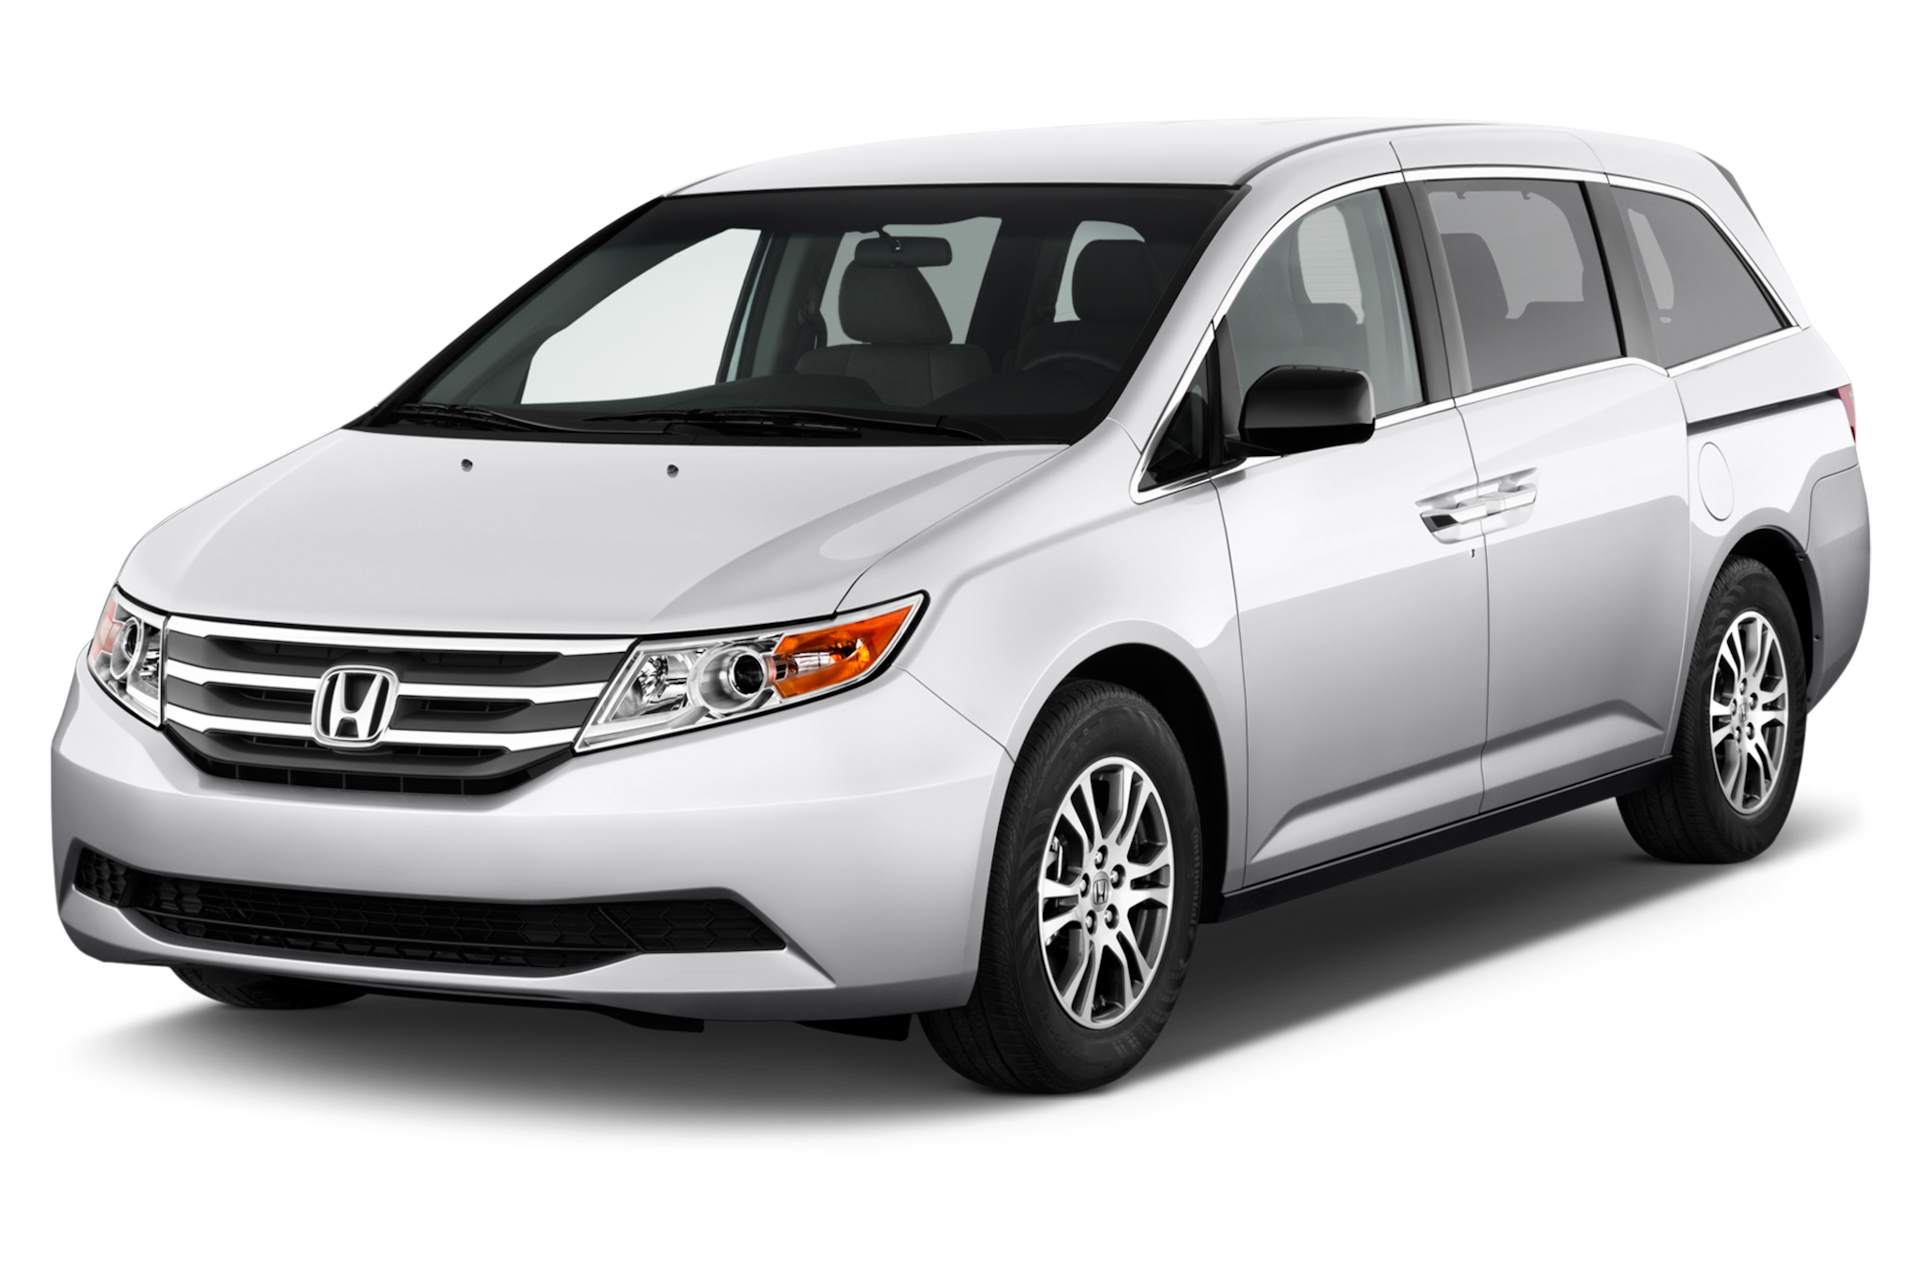 2012 Honda Odyssey Prices, Reviews, and Photos - MotorTrend